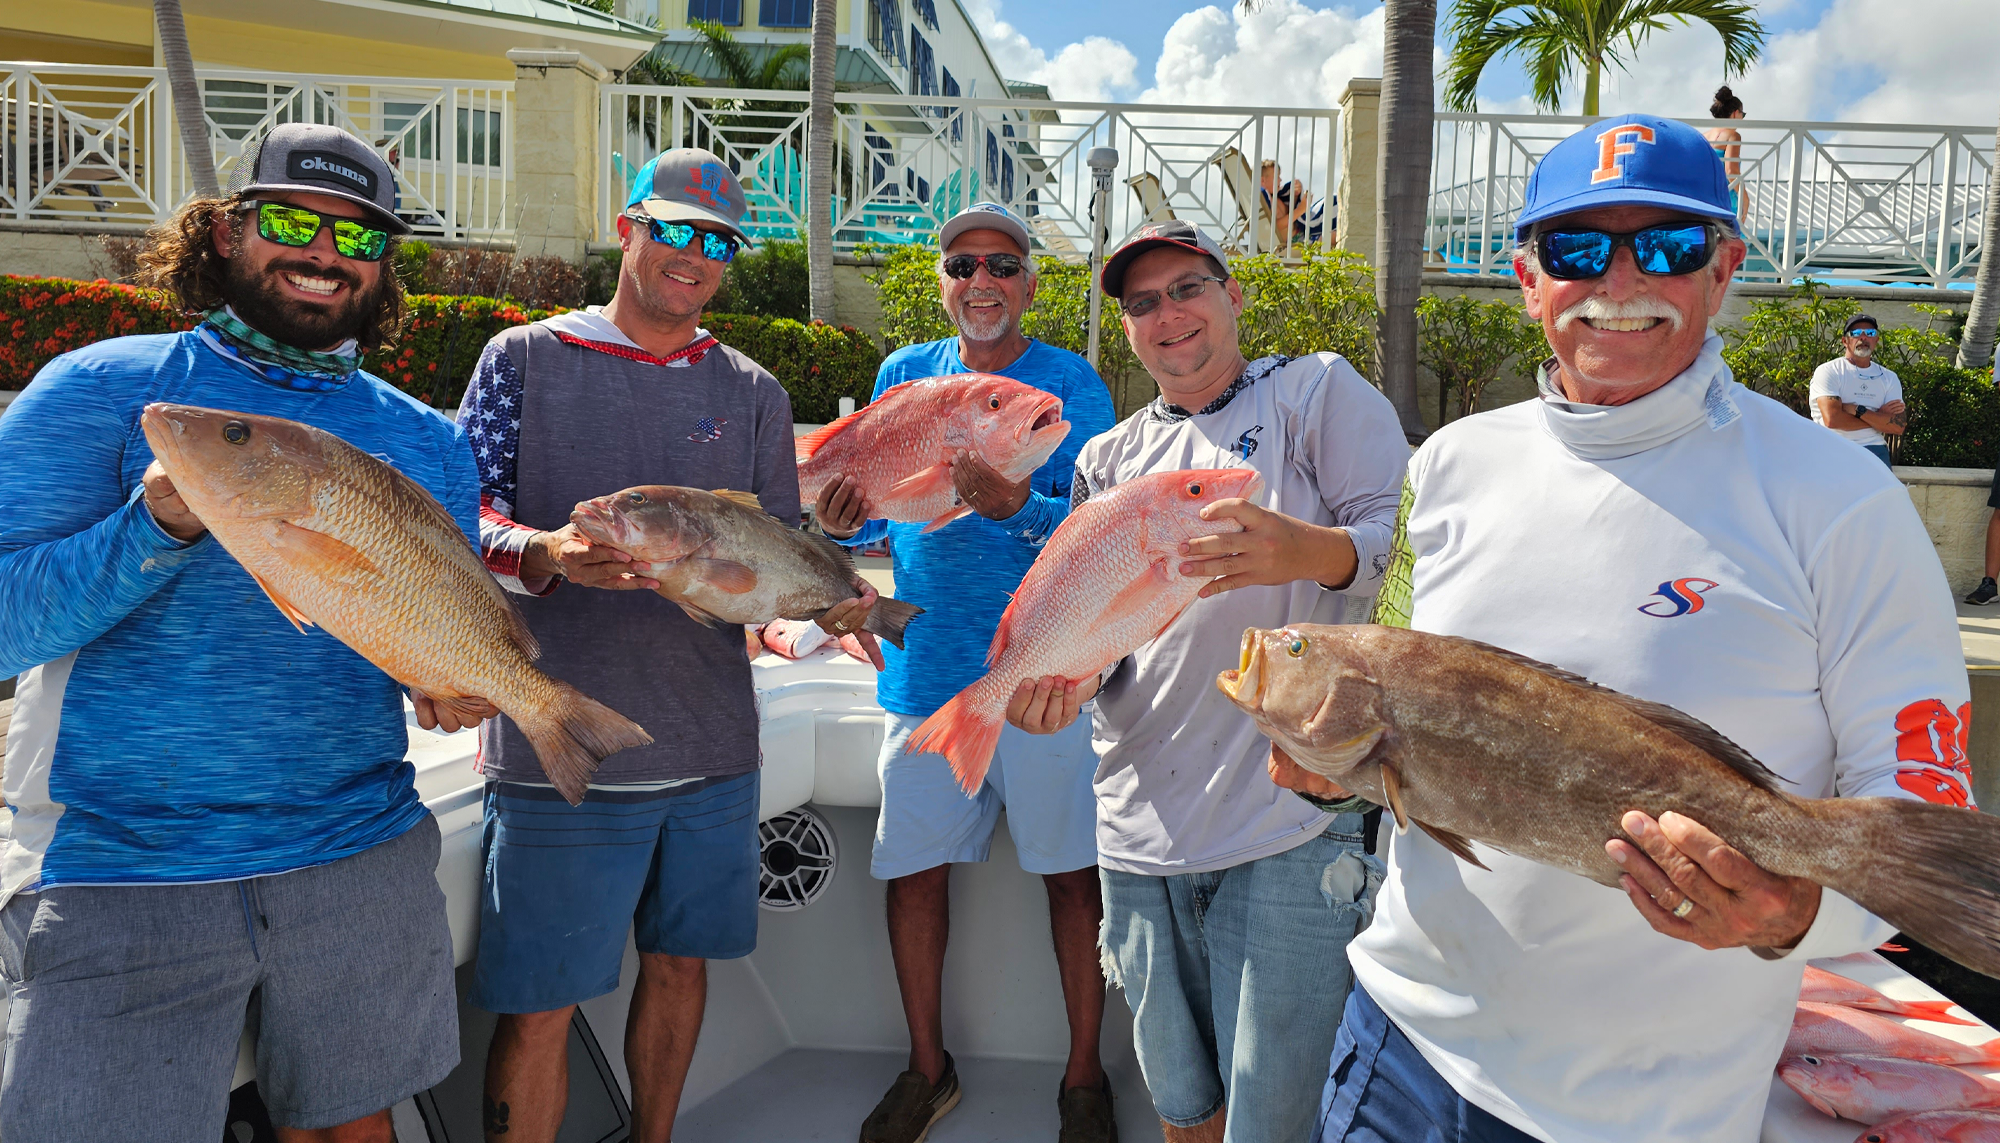 Fishing for American Red Snapper: A Thrilling Pursuit